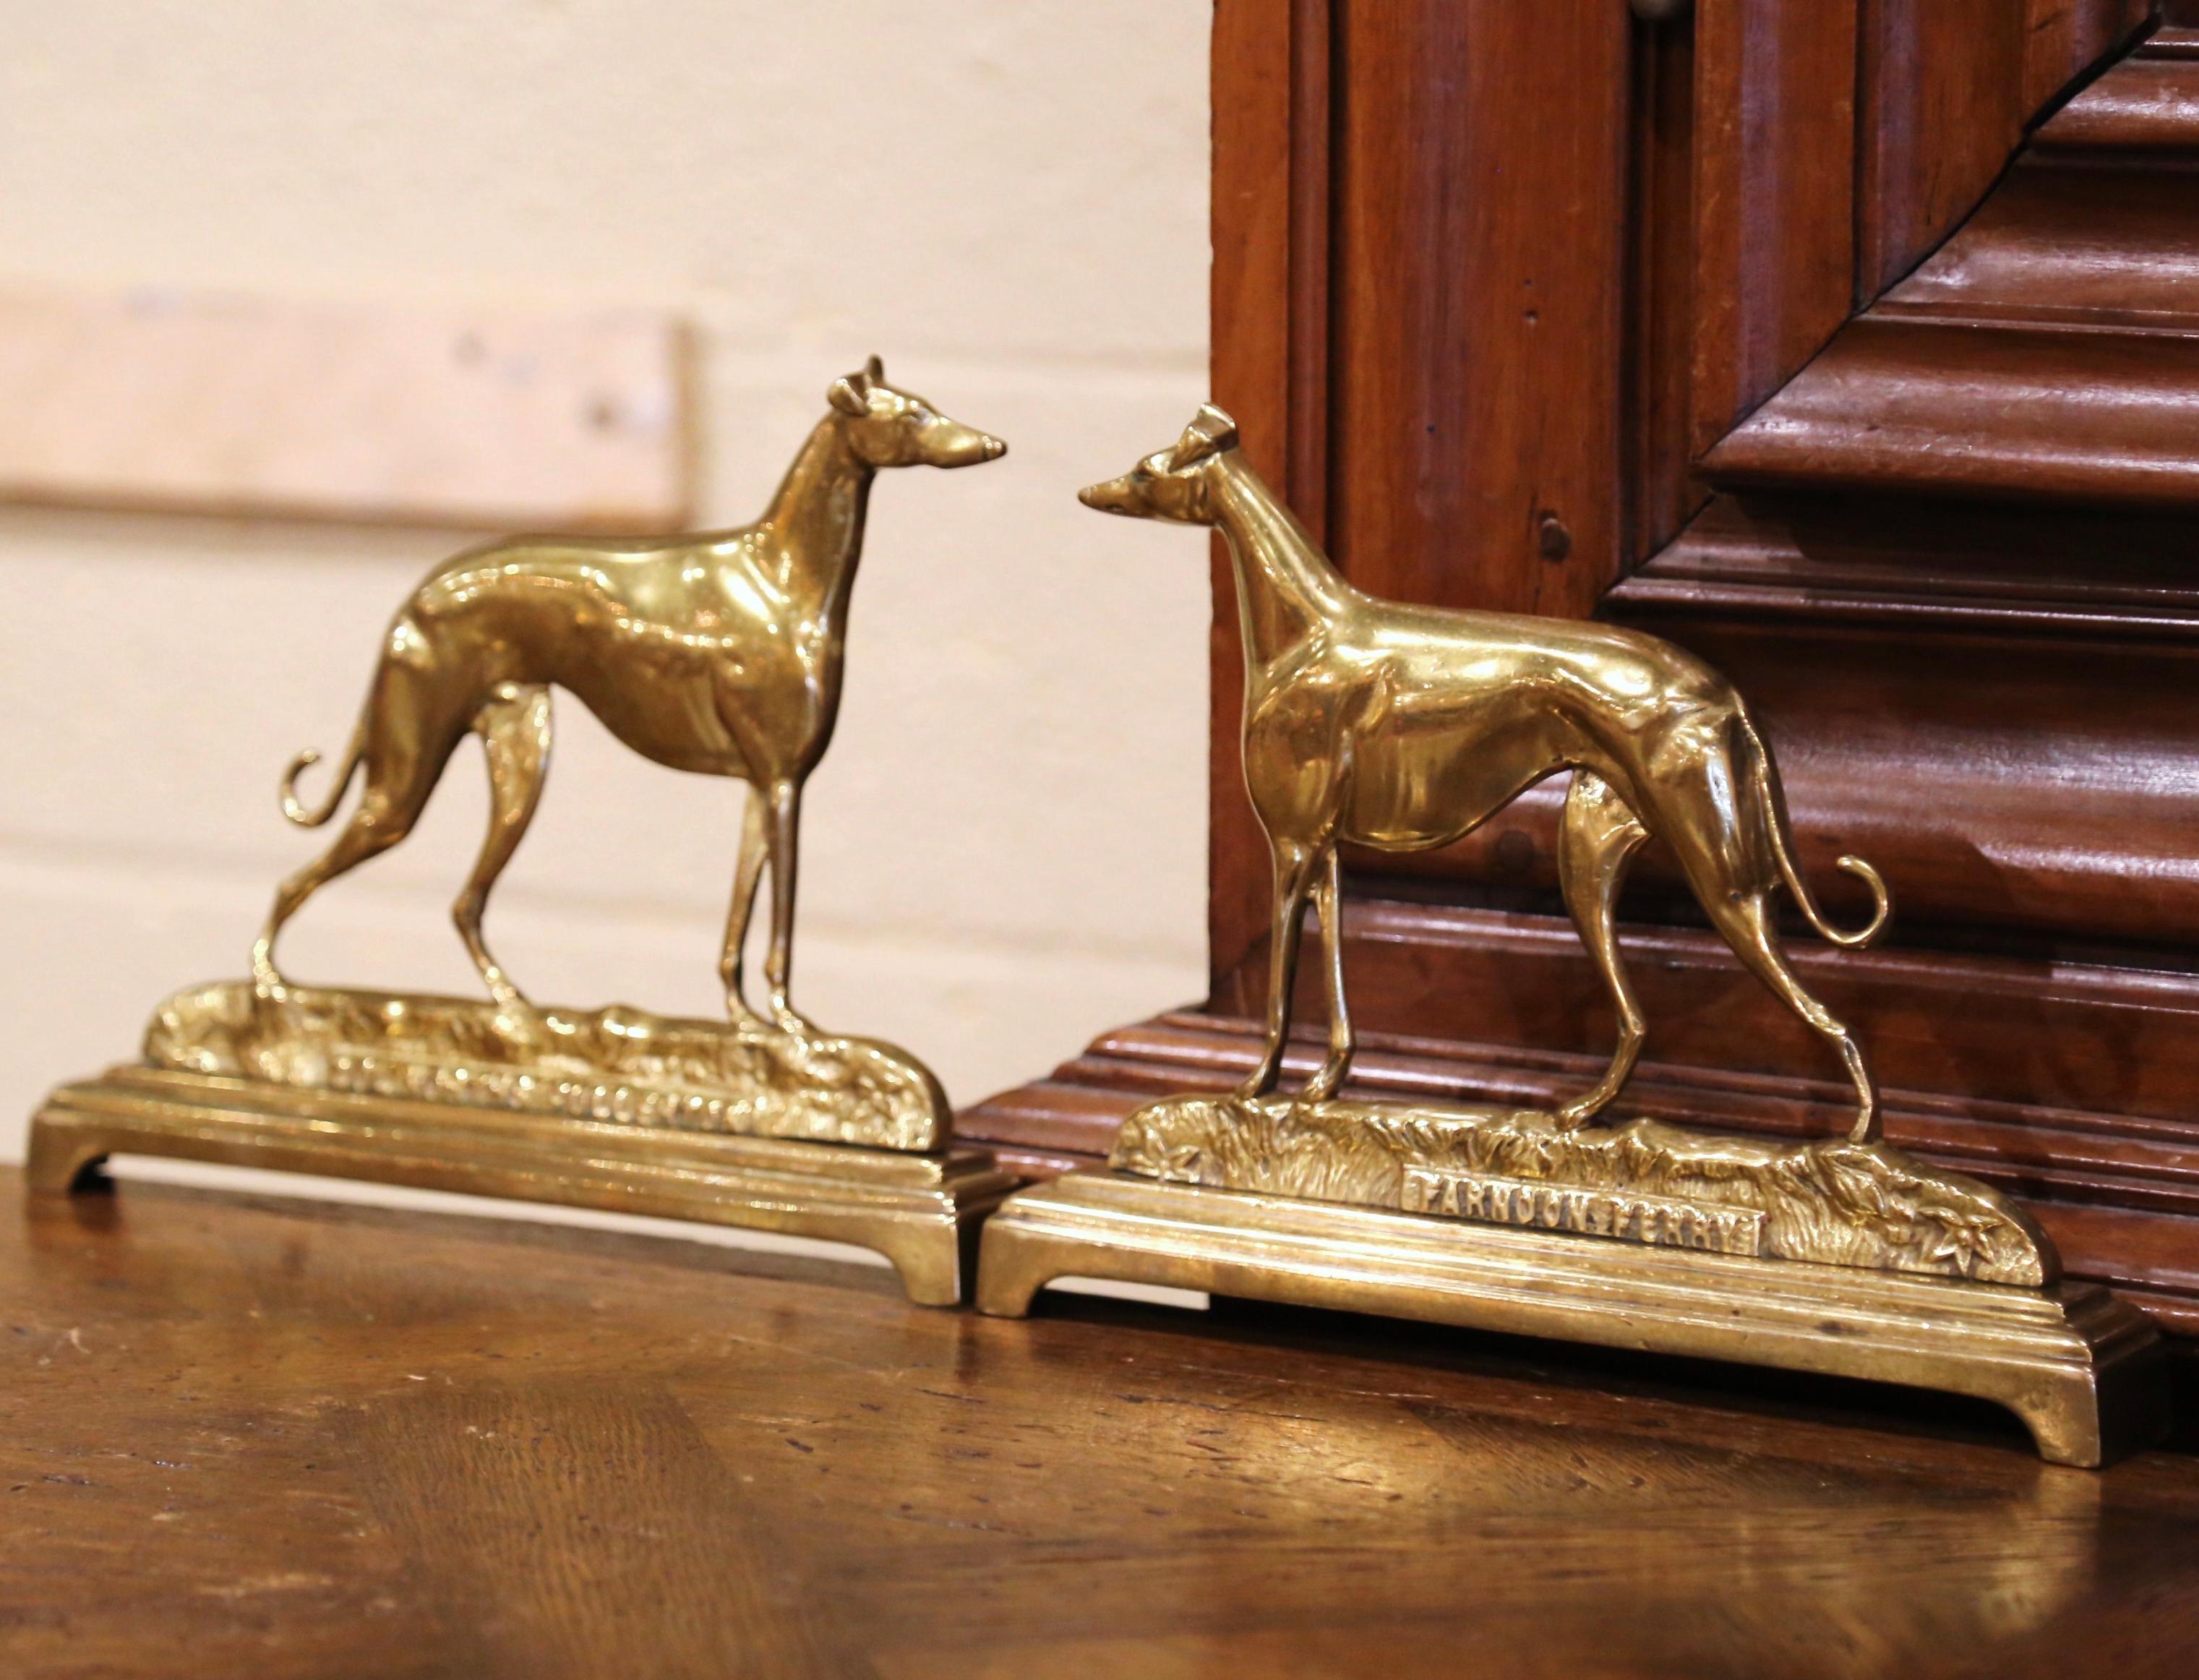 Complement your office shelving with this pair of dog Waterloo Cup winners. Crafted in the UK circa 1910 and built of brass, the dogs hold significant historical value, as they represent esteemed champions of the prestigious Waterloo Cup. Colonel